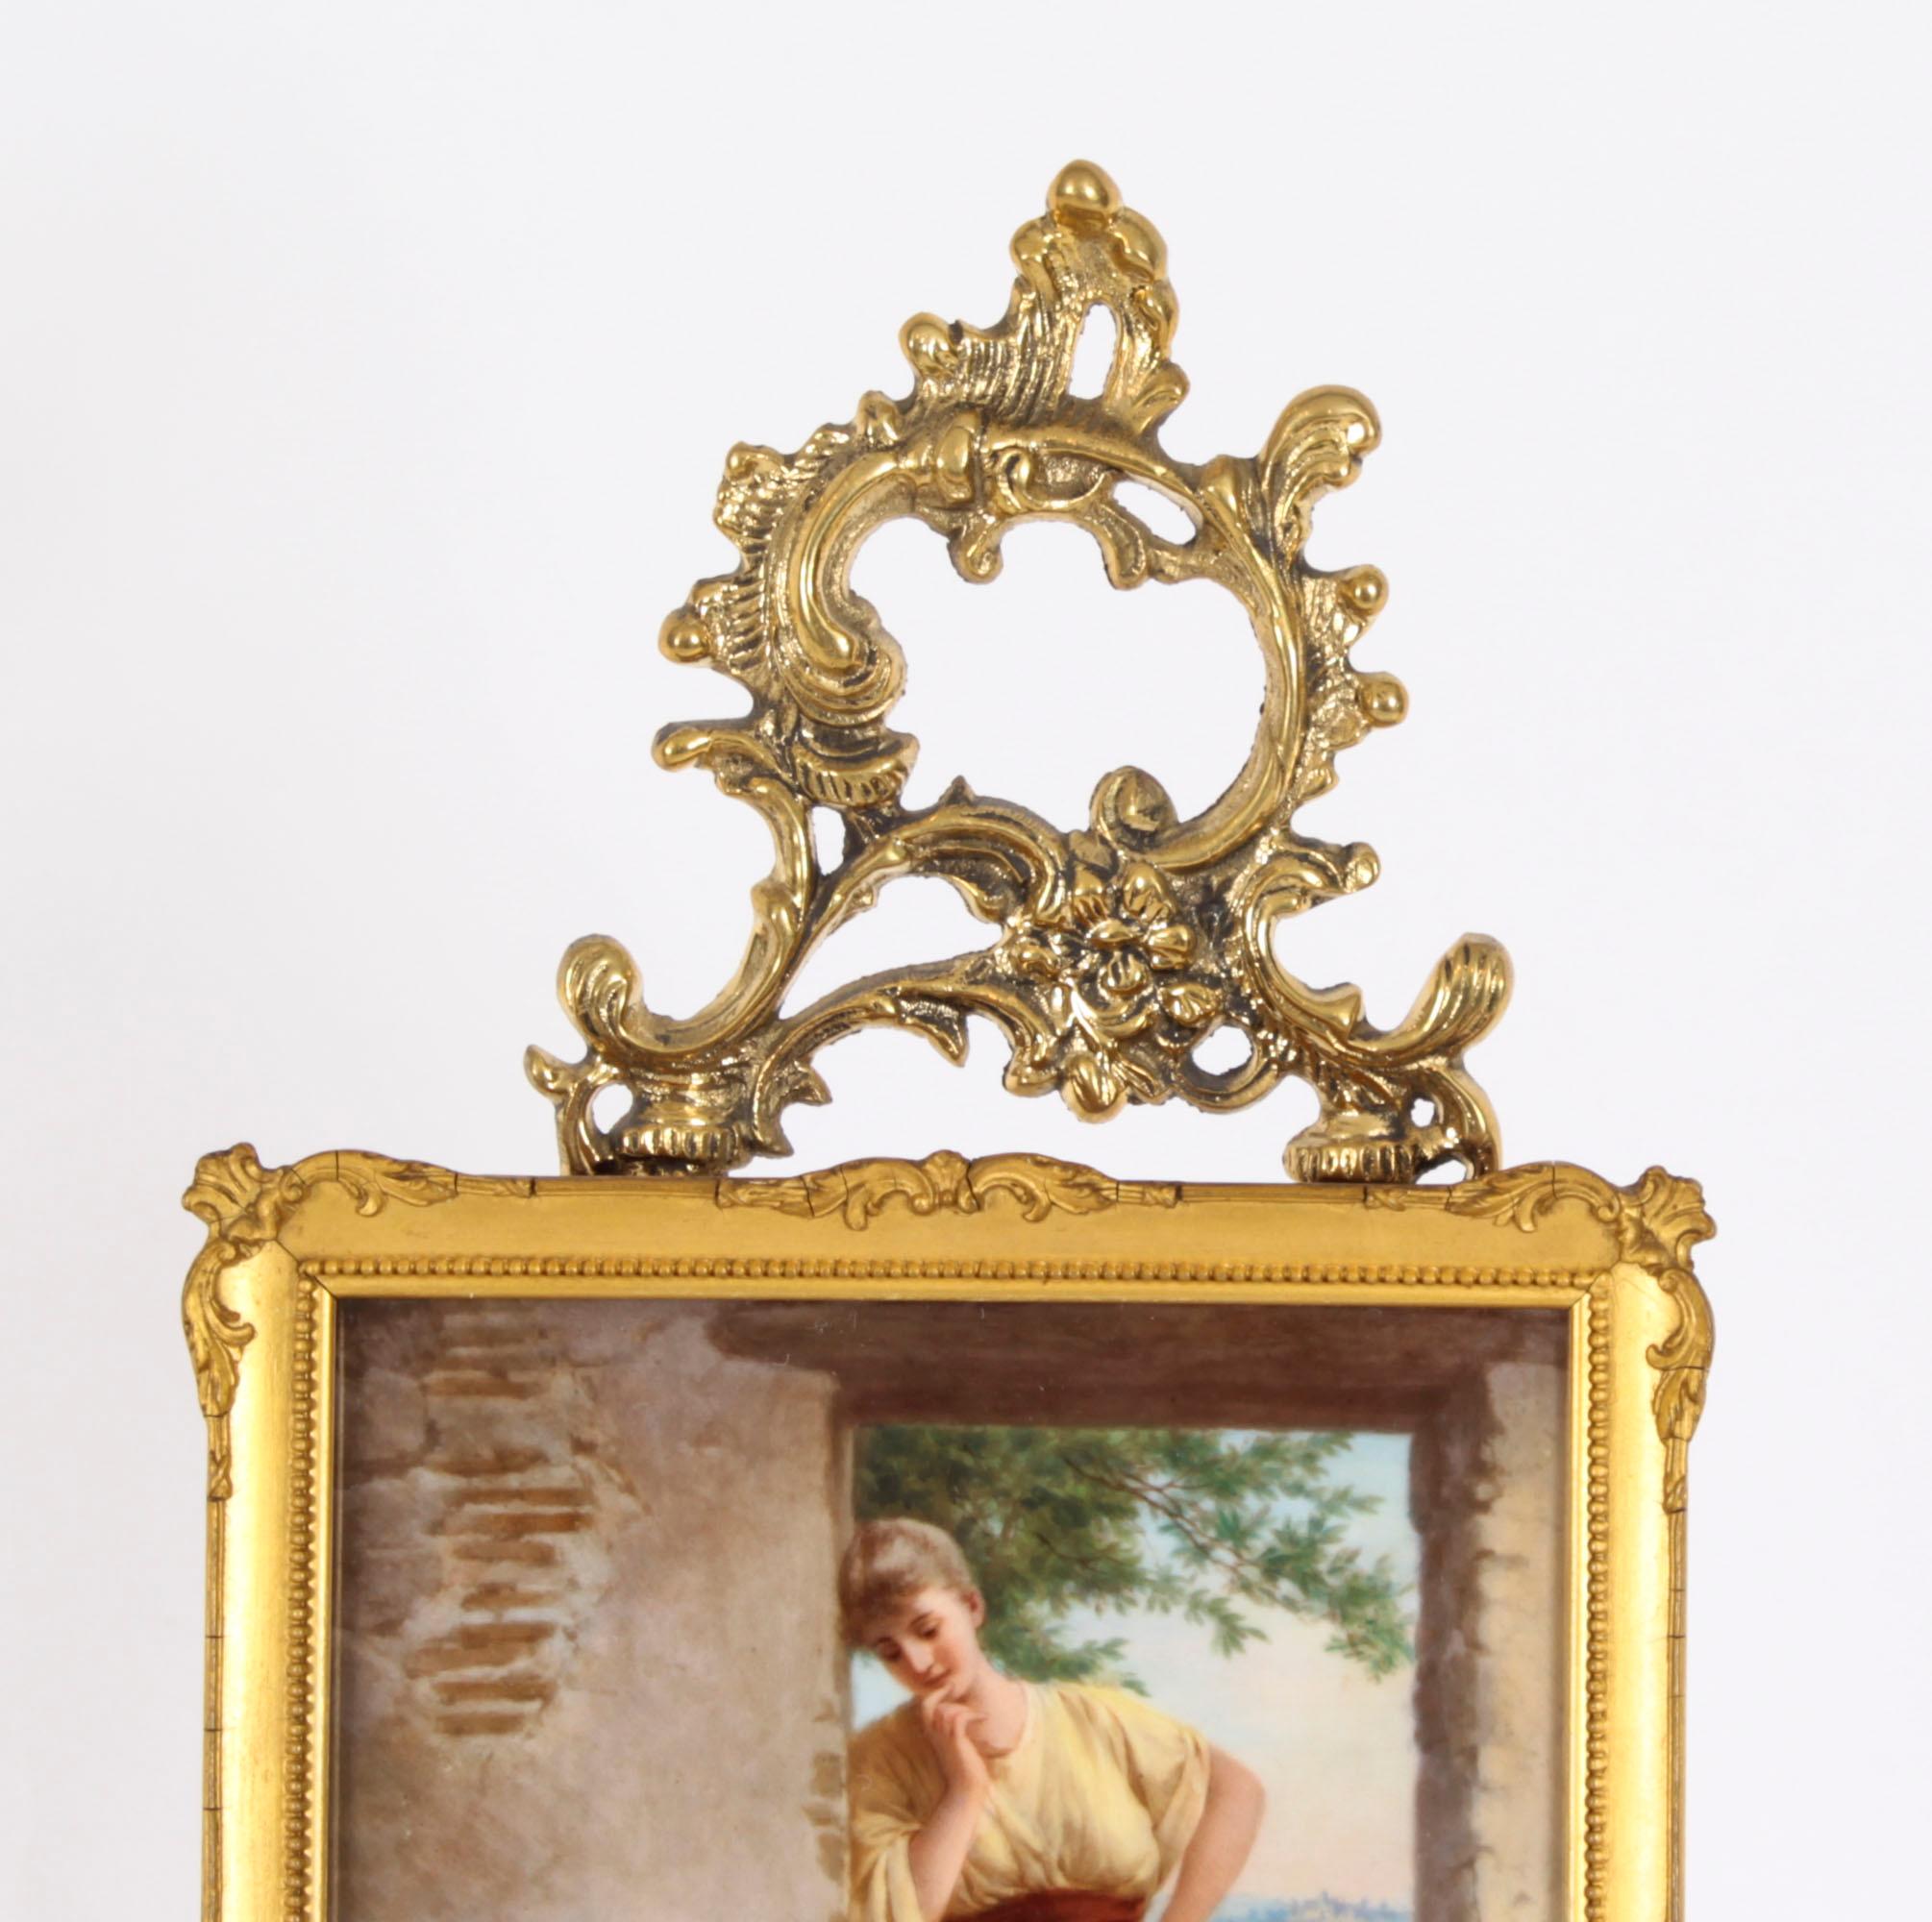 This is an absolutely stunning and finely painted KPM Berlin Plaque after Paul Thumann's (1834-1908) 'Kunst Bringt Gunst' (meaning 'Art wins heart'), signed Knouller and raised on a decorative gilt bronze easel stand, circa 1880 in date.
 
 This